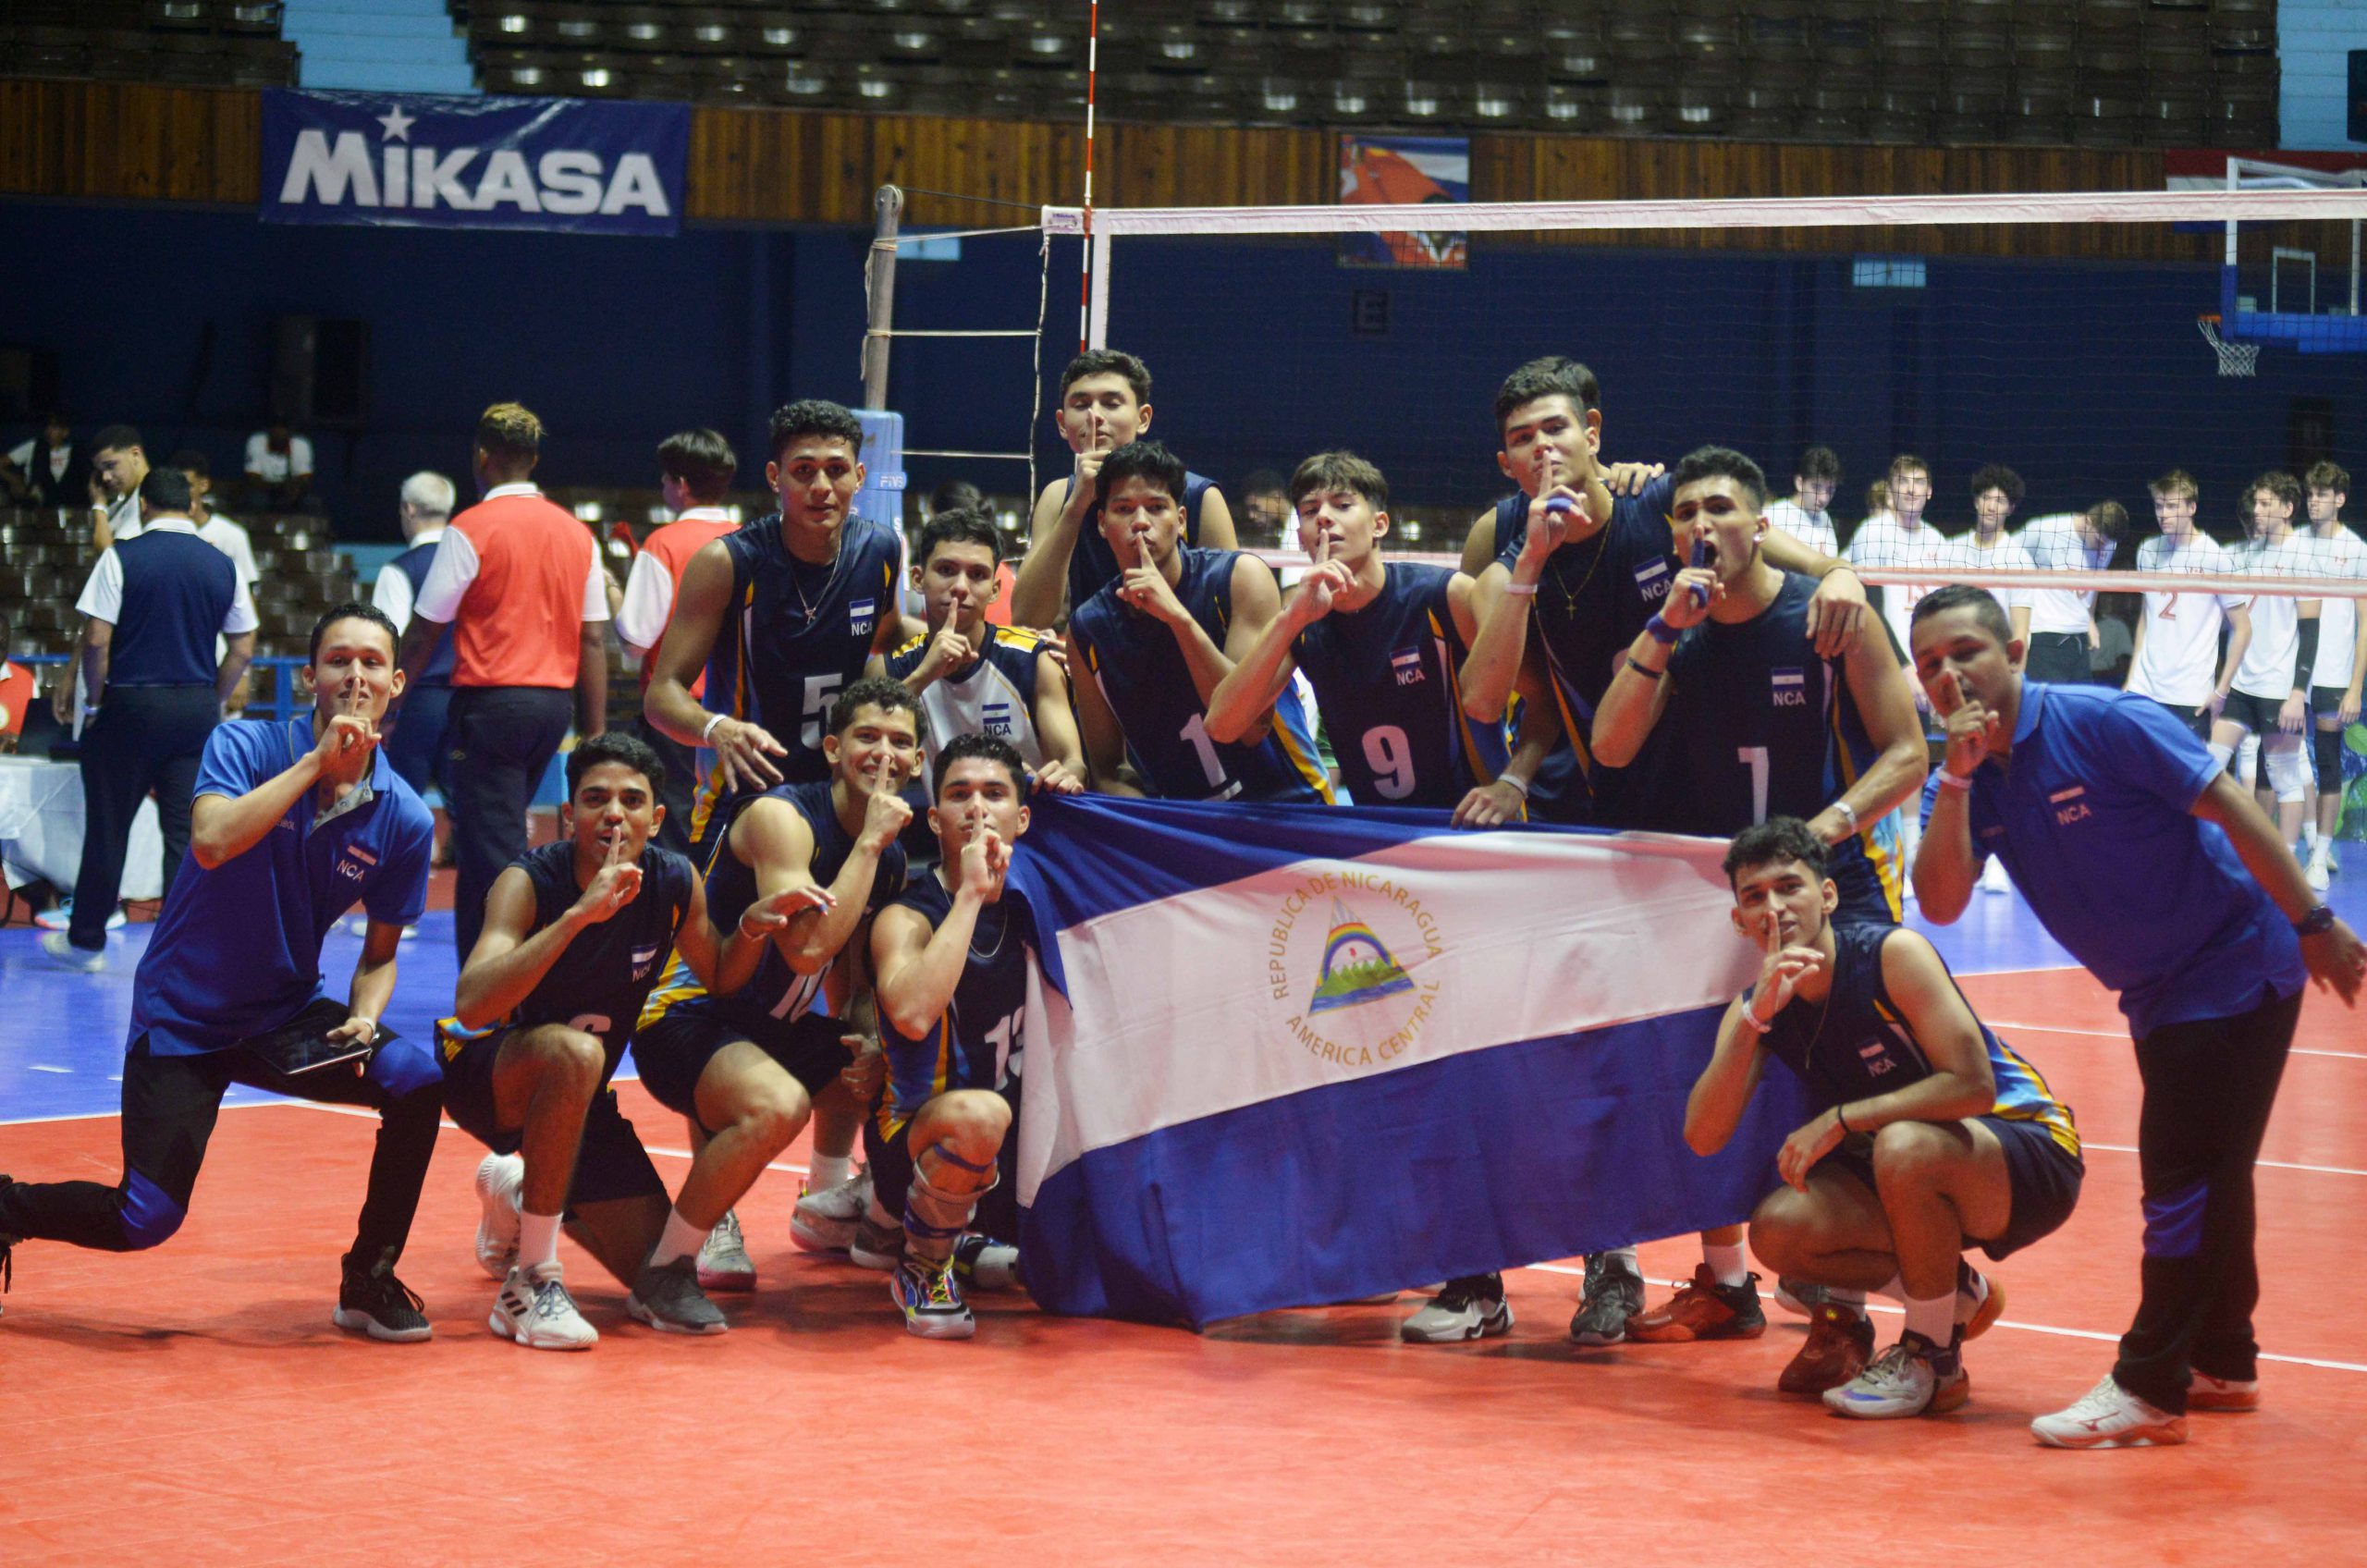 Nicaragua snatched fifth place from Dominican Republic at U21 Pan Am Cup